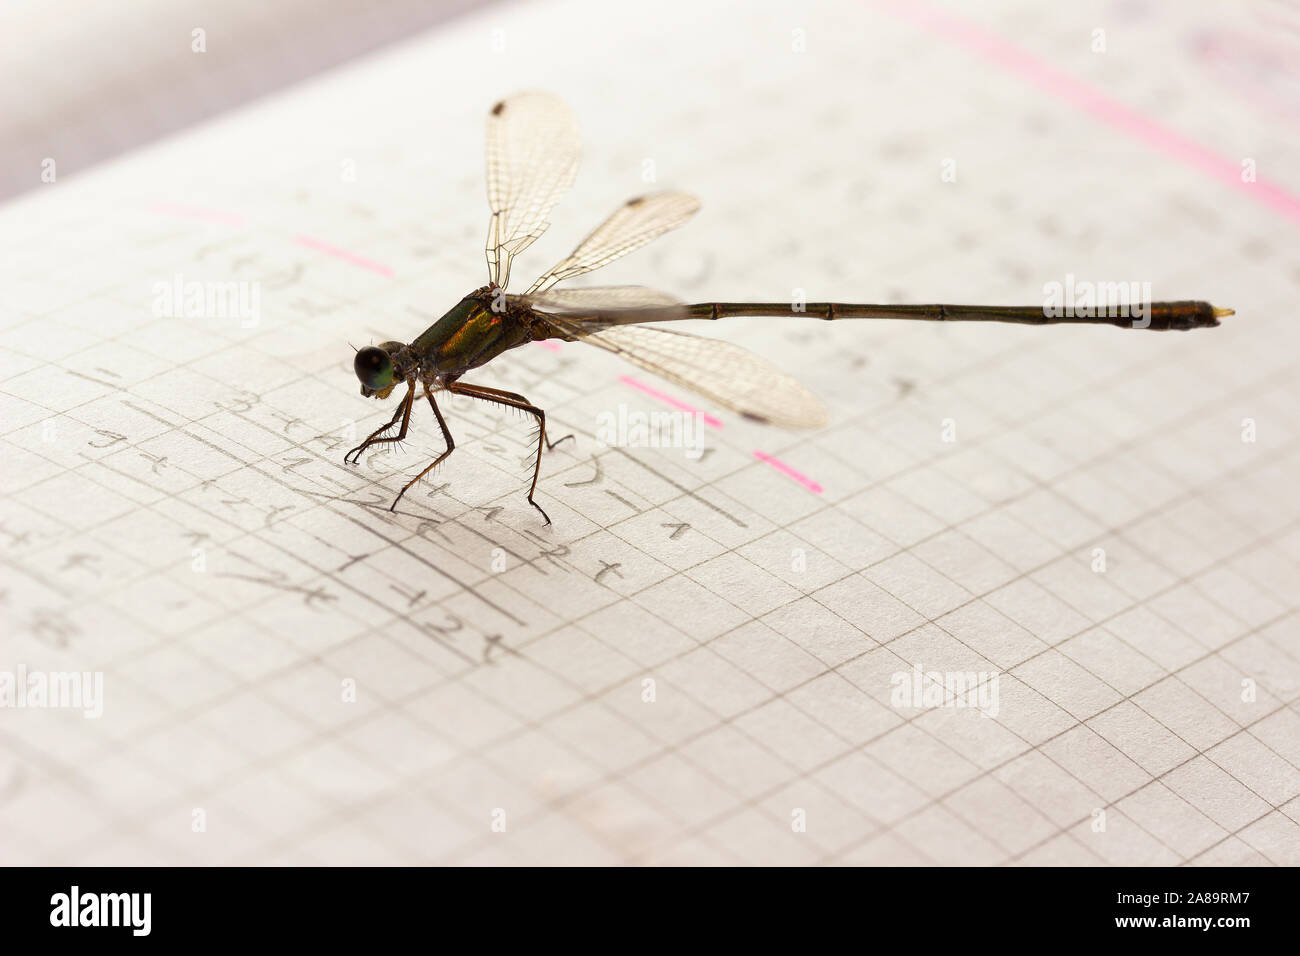 Dragonfly resting on a notebook in mathematics Stock Photo